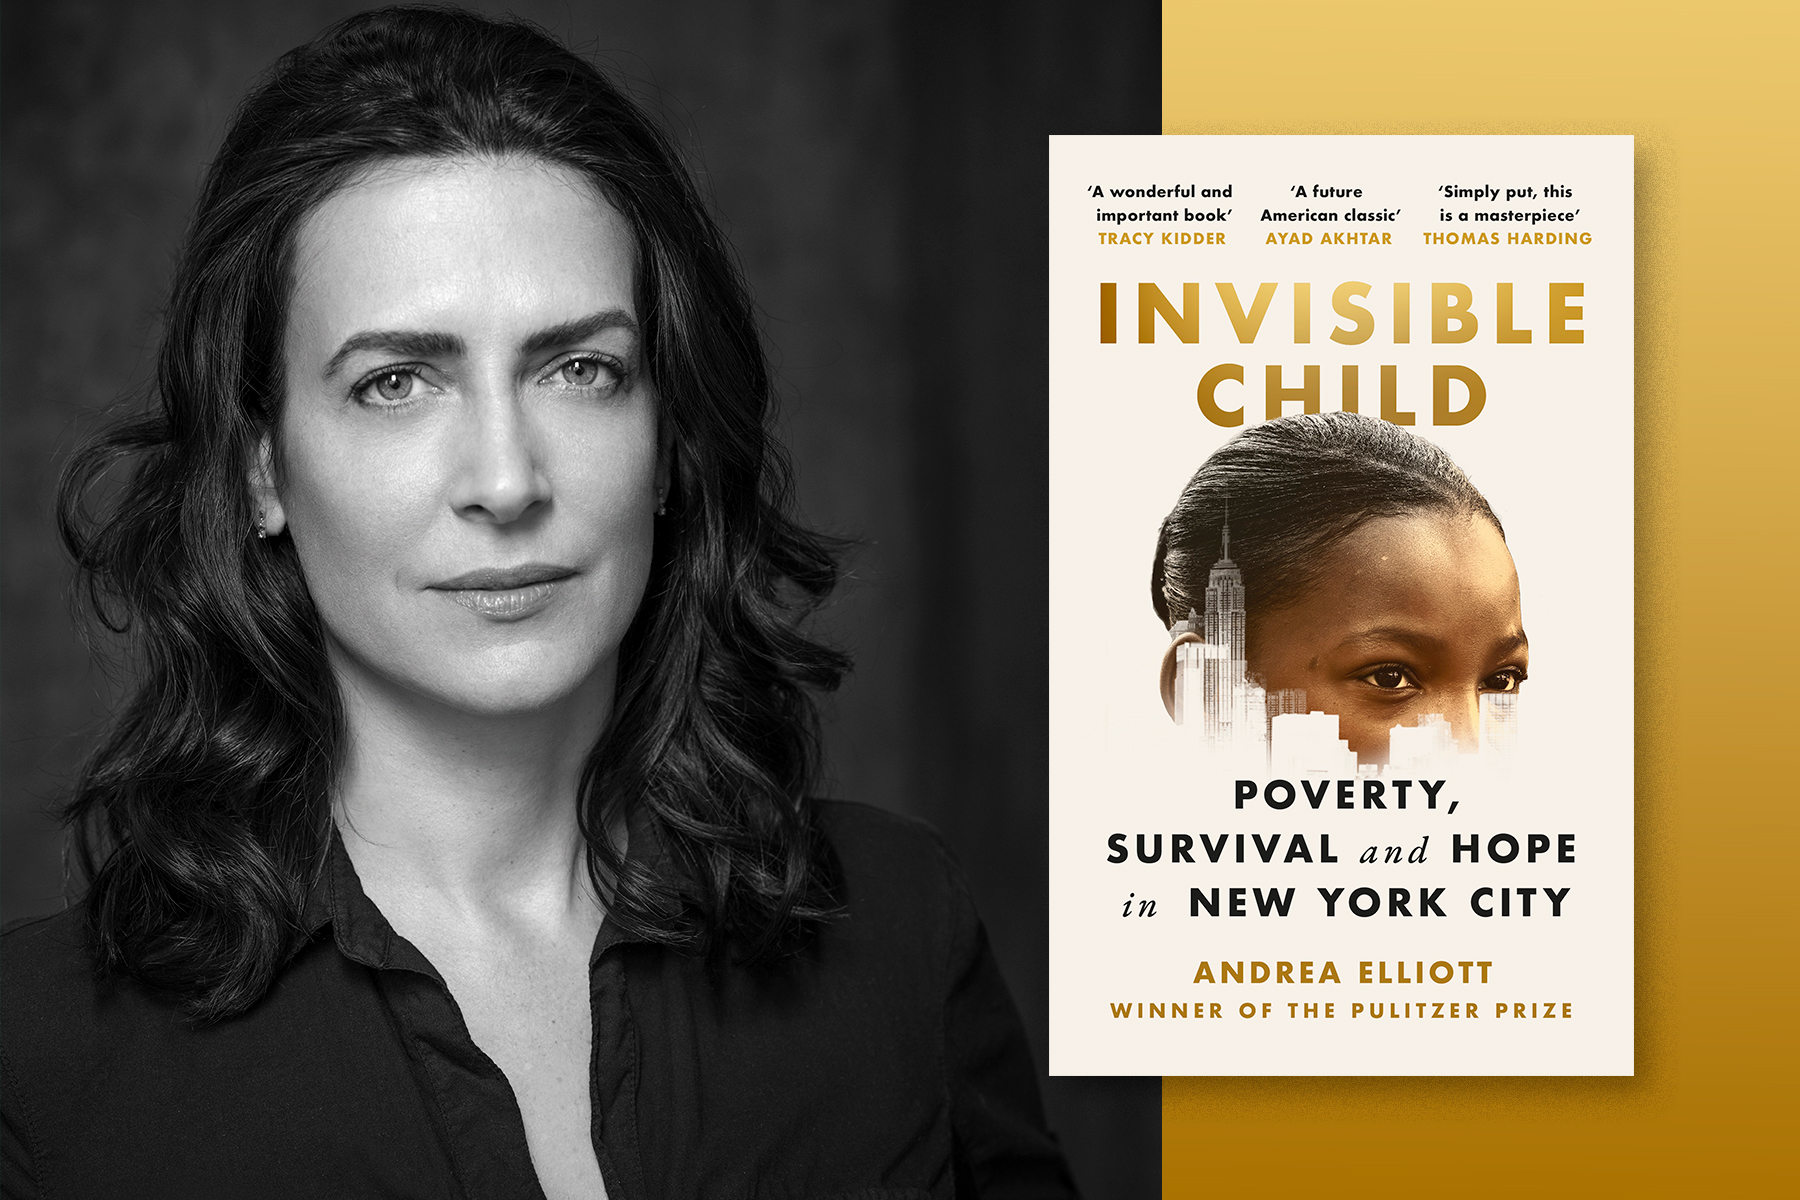 A photograph of Andrea Elliott next to the cover of her book, Invisible Child